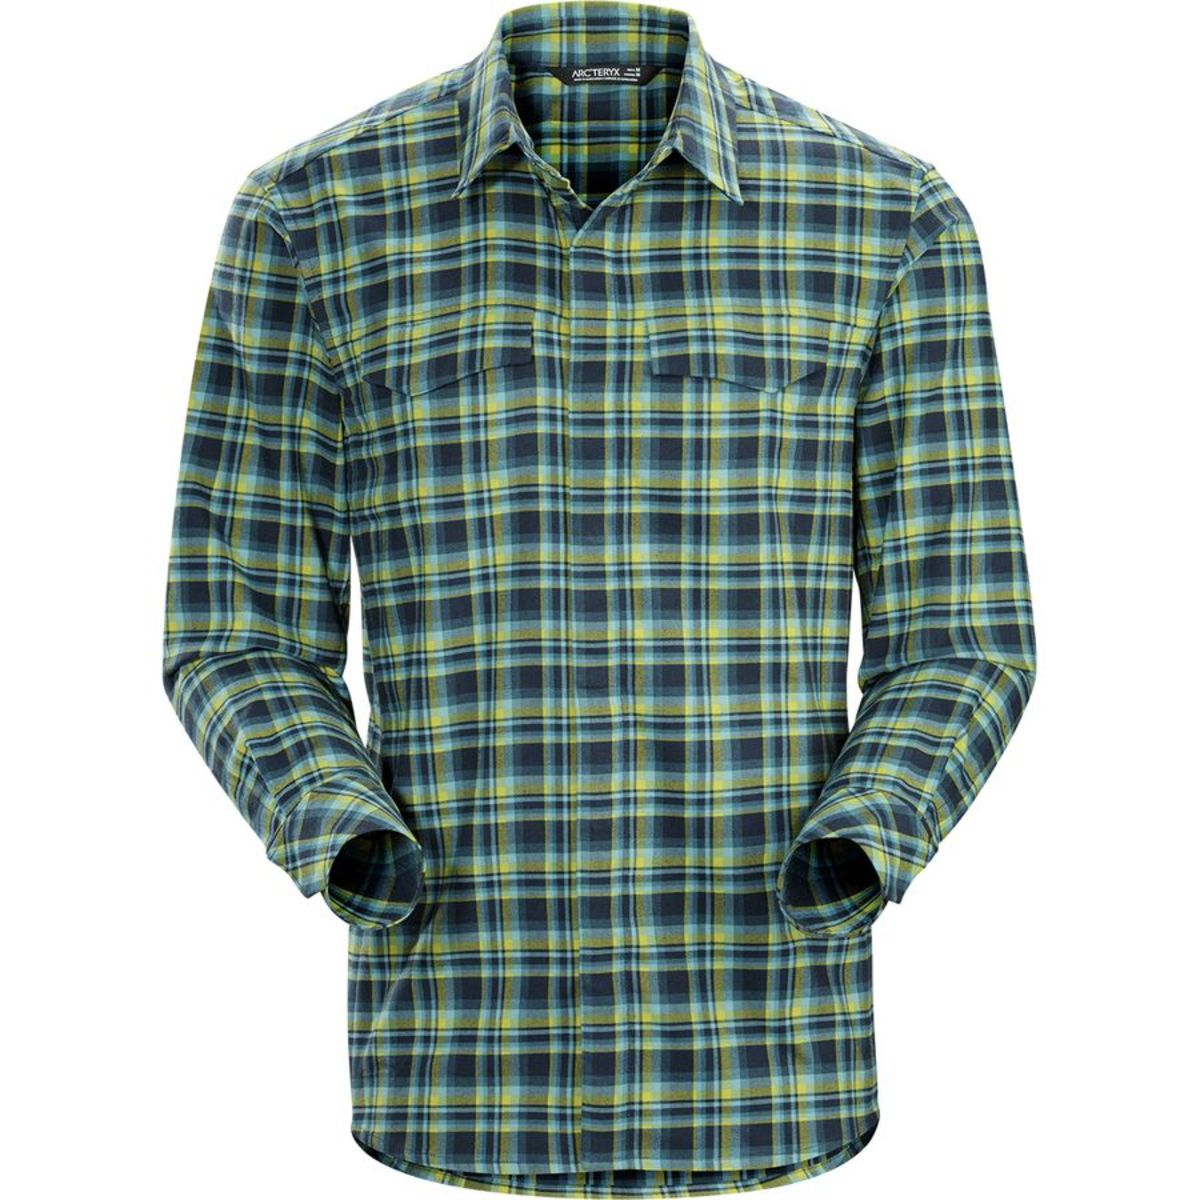 Four of the Best Technical Flannel Shirts for Men | POWDER - Powder